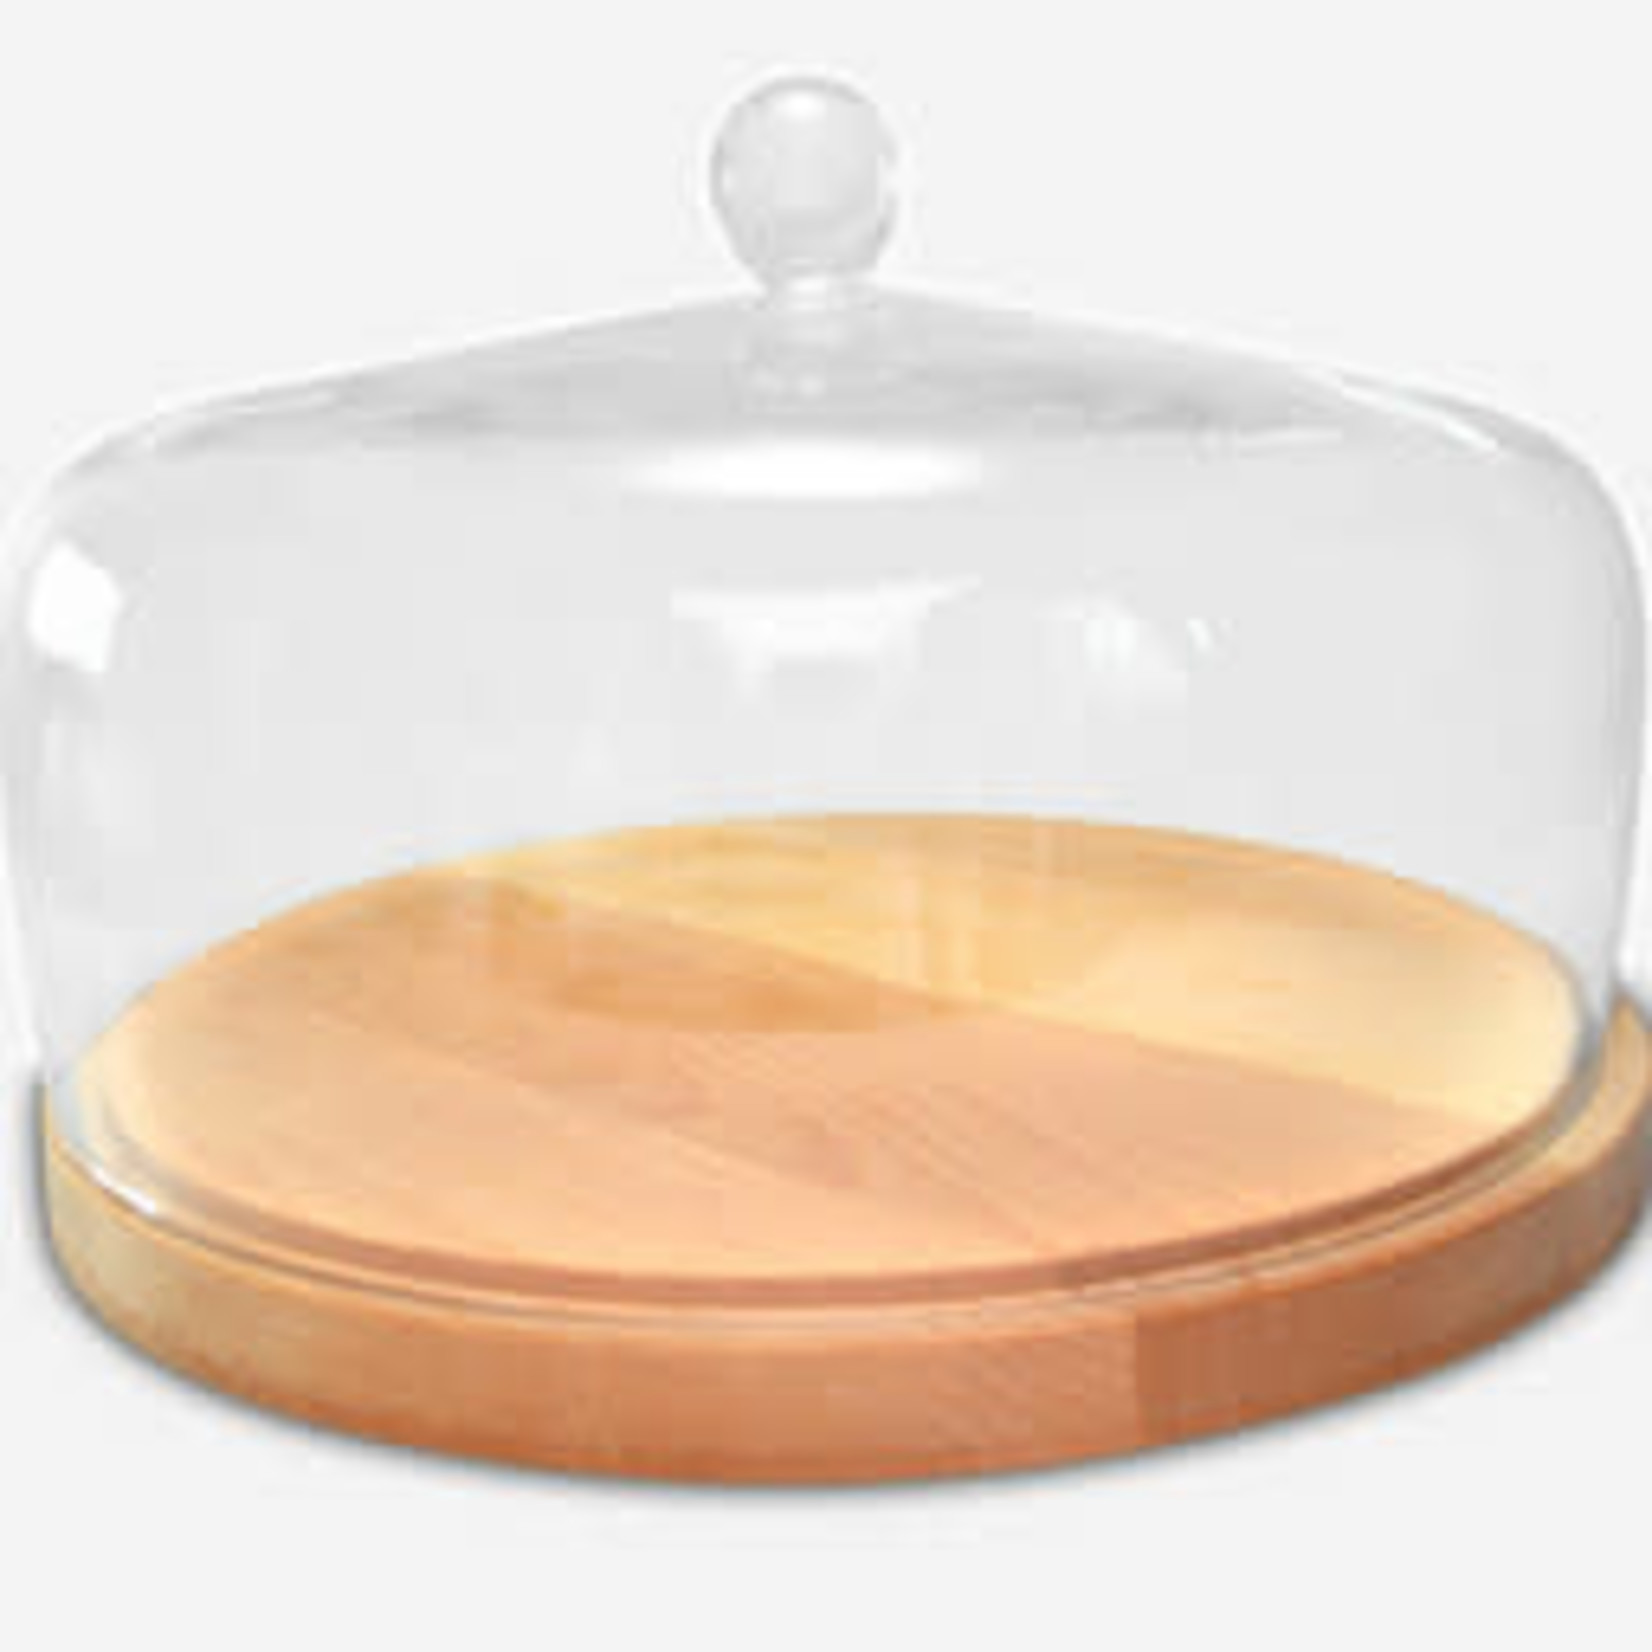 8-Inch Clear Natural Glass Cloche Display Dome Wooden Base CAKE STAND Party  - Walmart.com